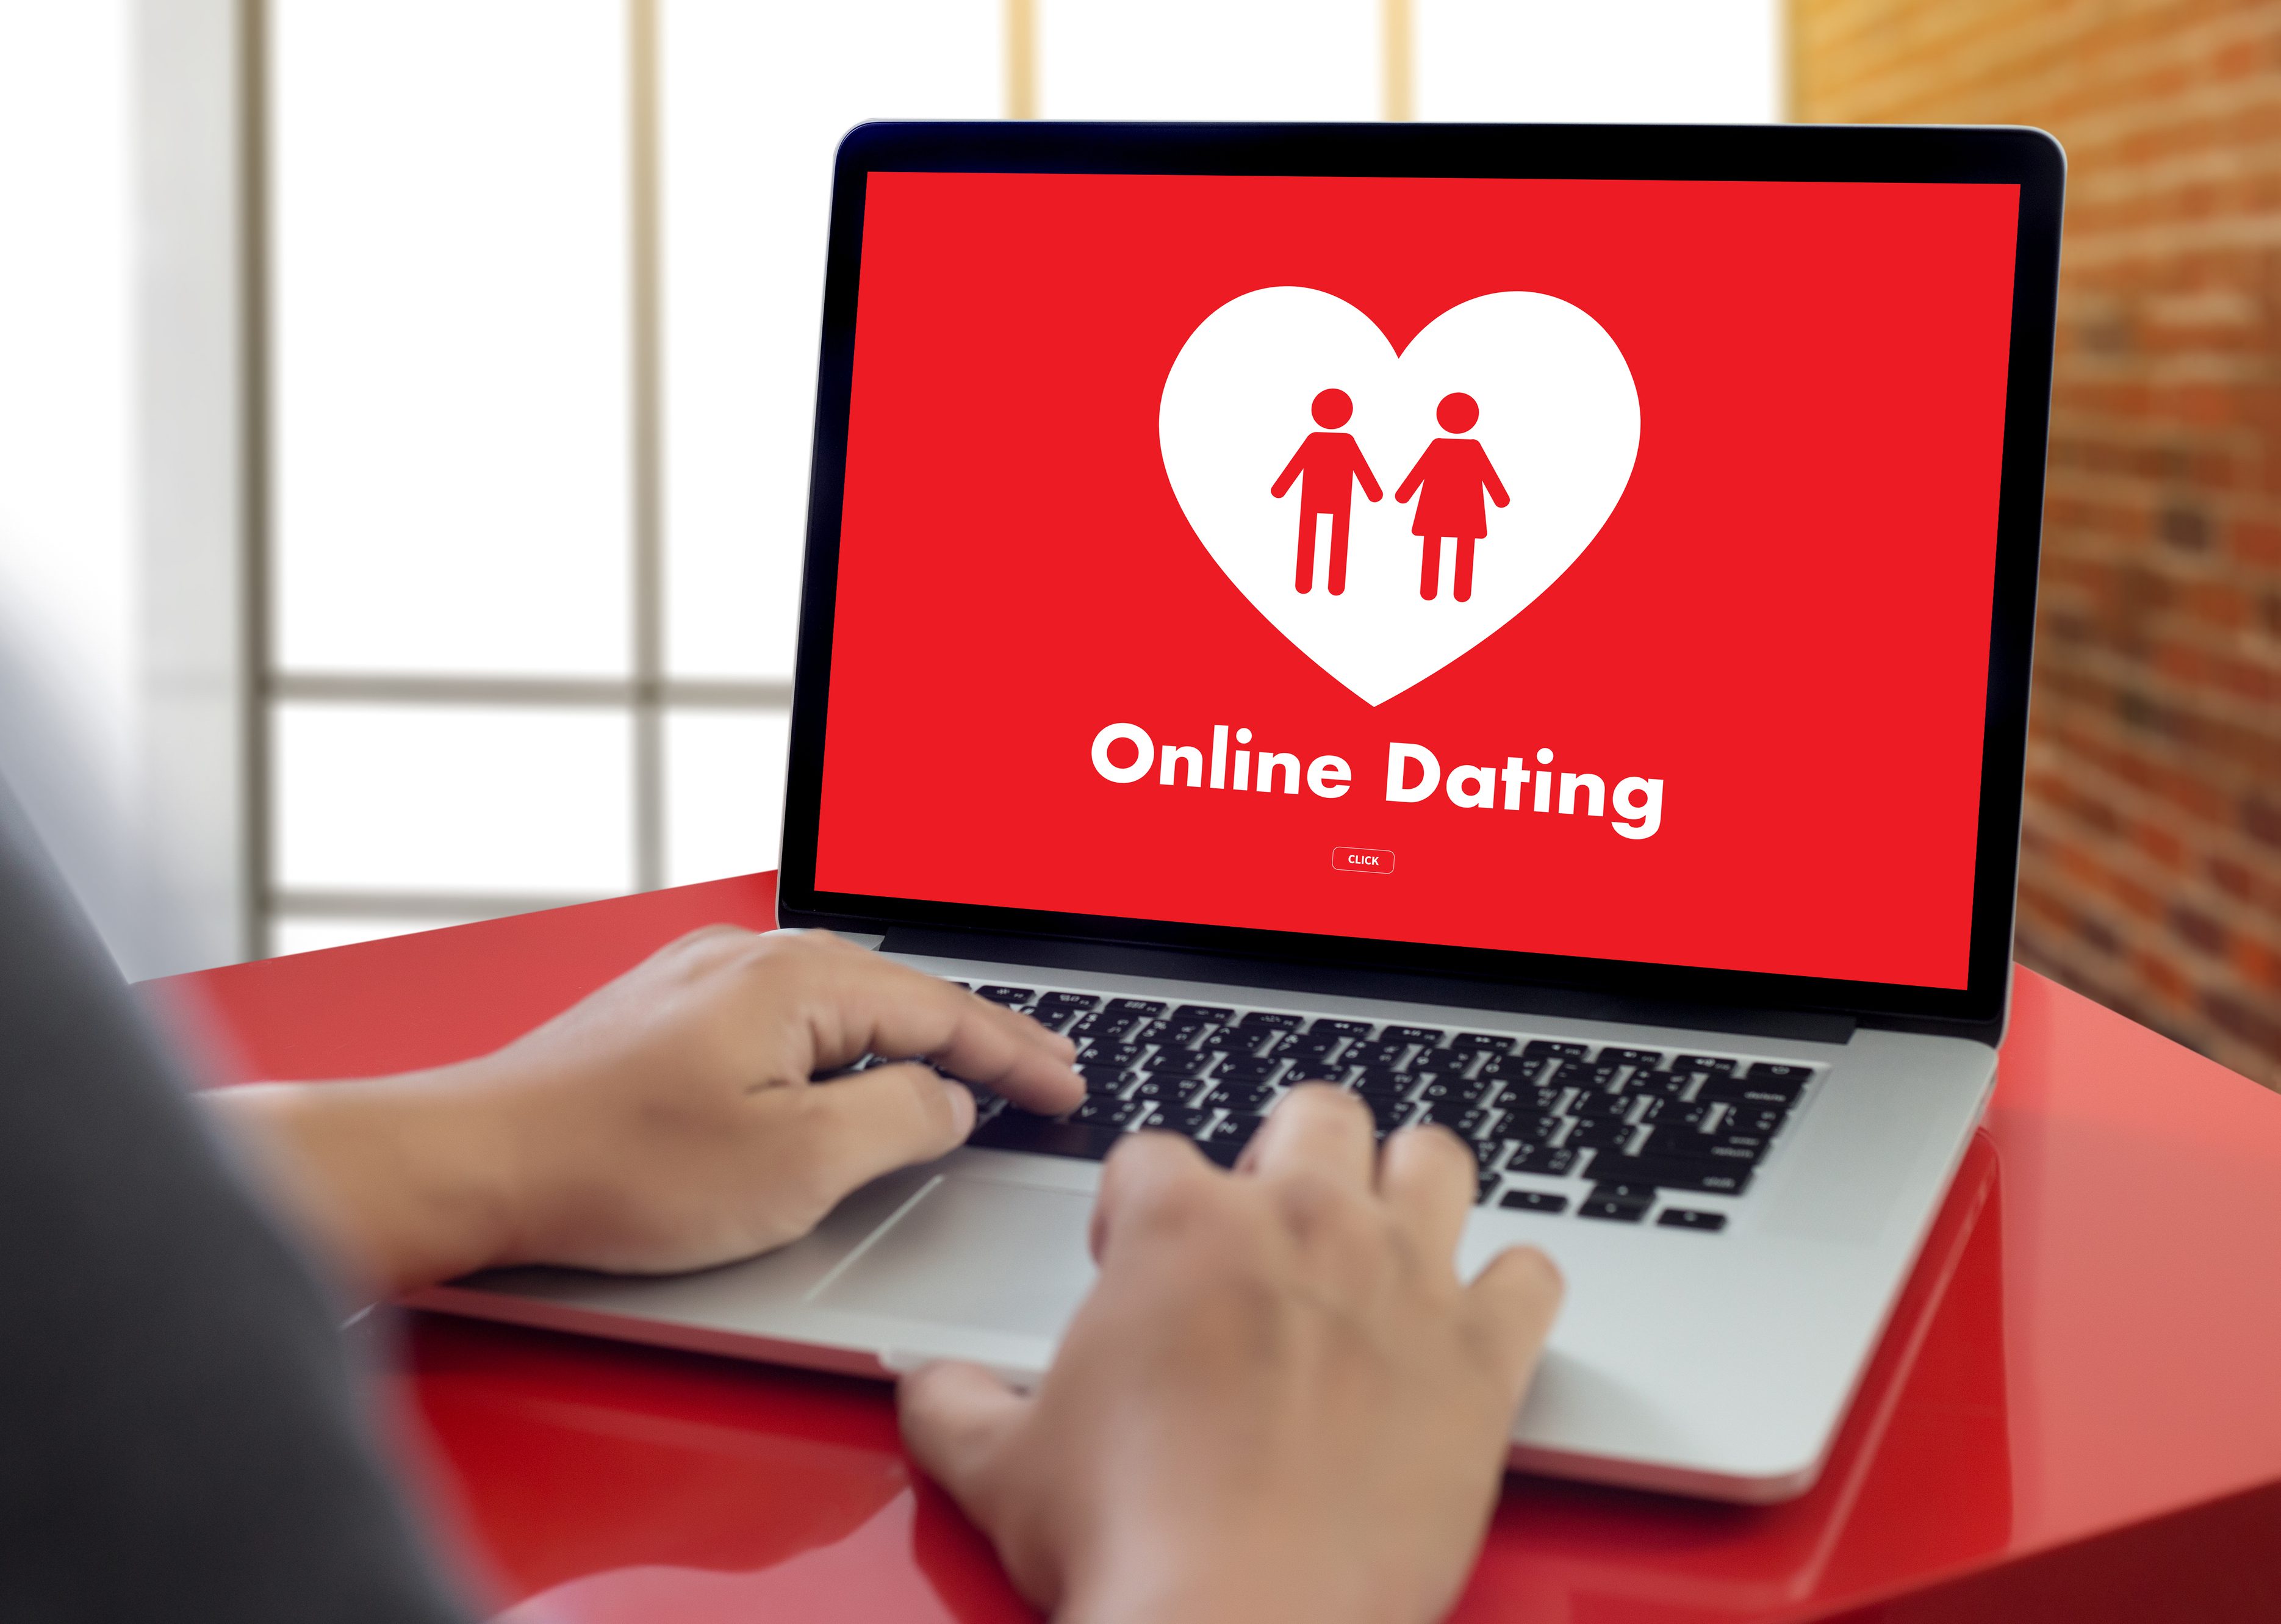 Better To Just Leave Your Online Dating Profile Empty?